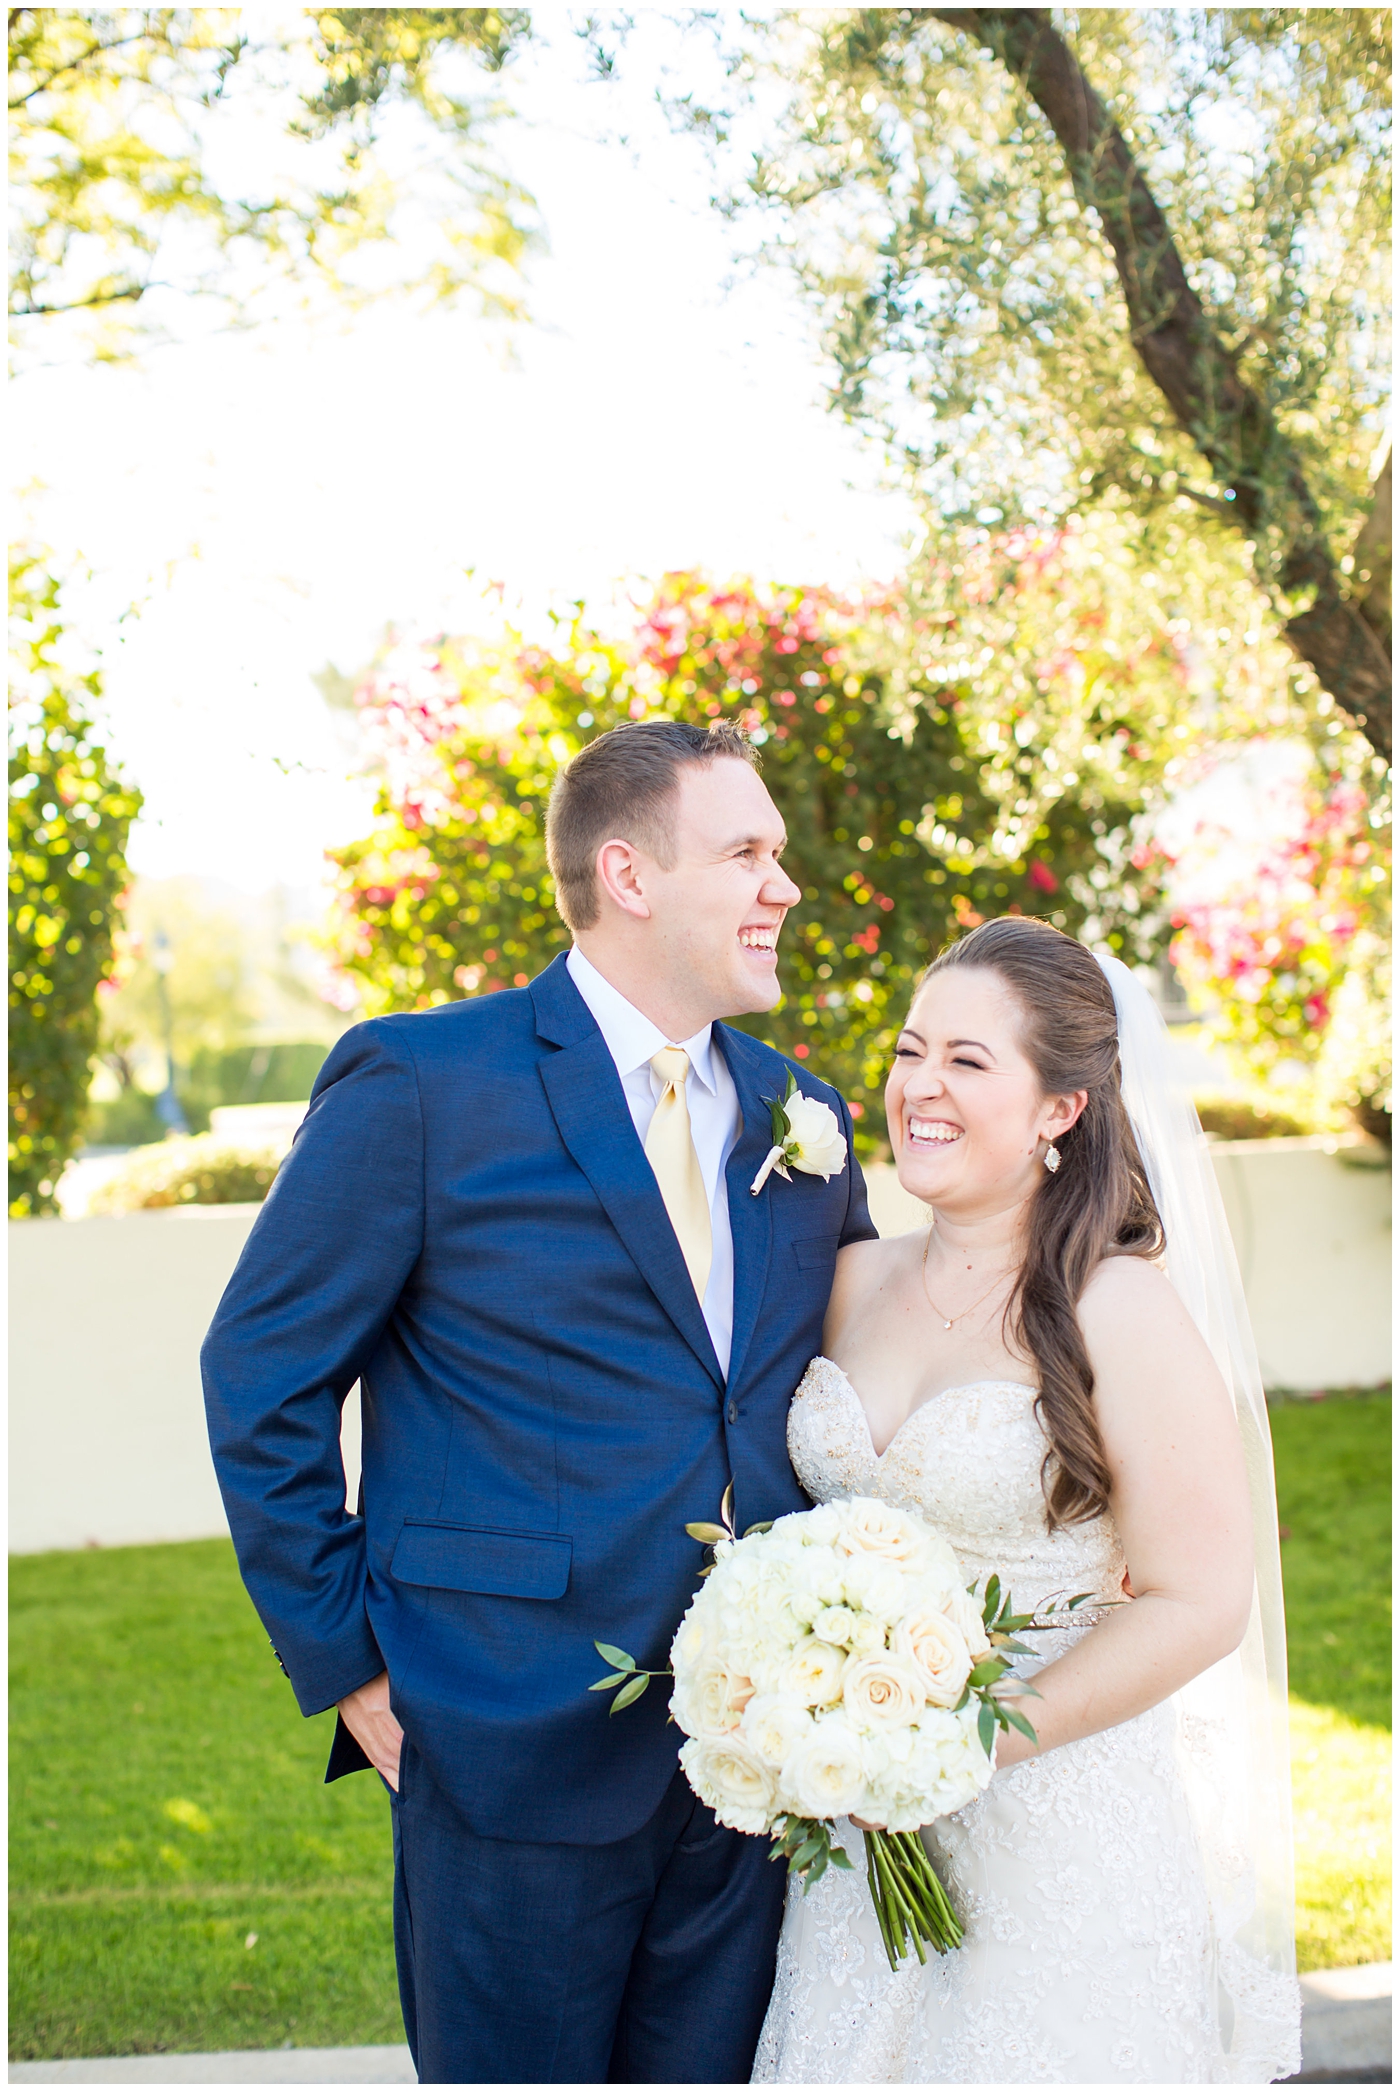 bride in lillian lottie couture wedding dress with white rose bouquet and groom in navy blue suit from men's warehouse bride and groom wedding portrait